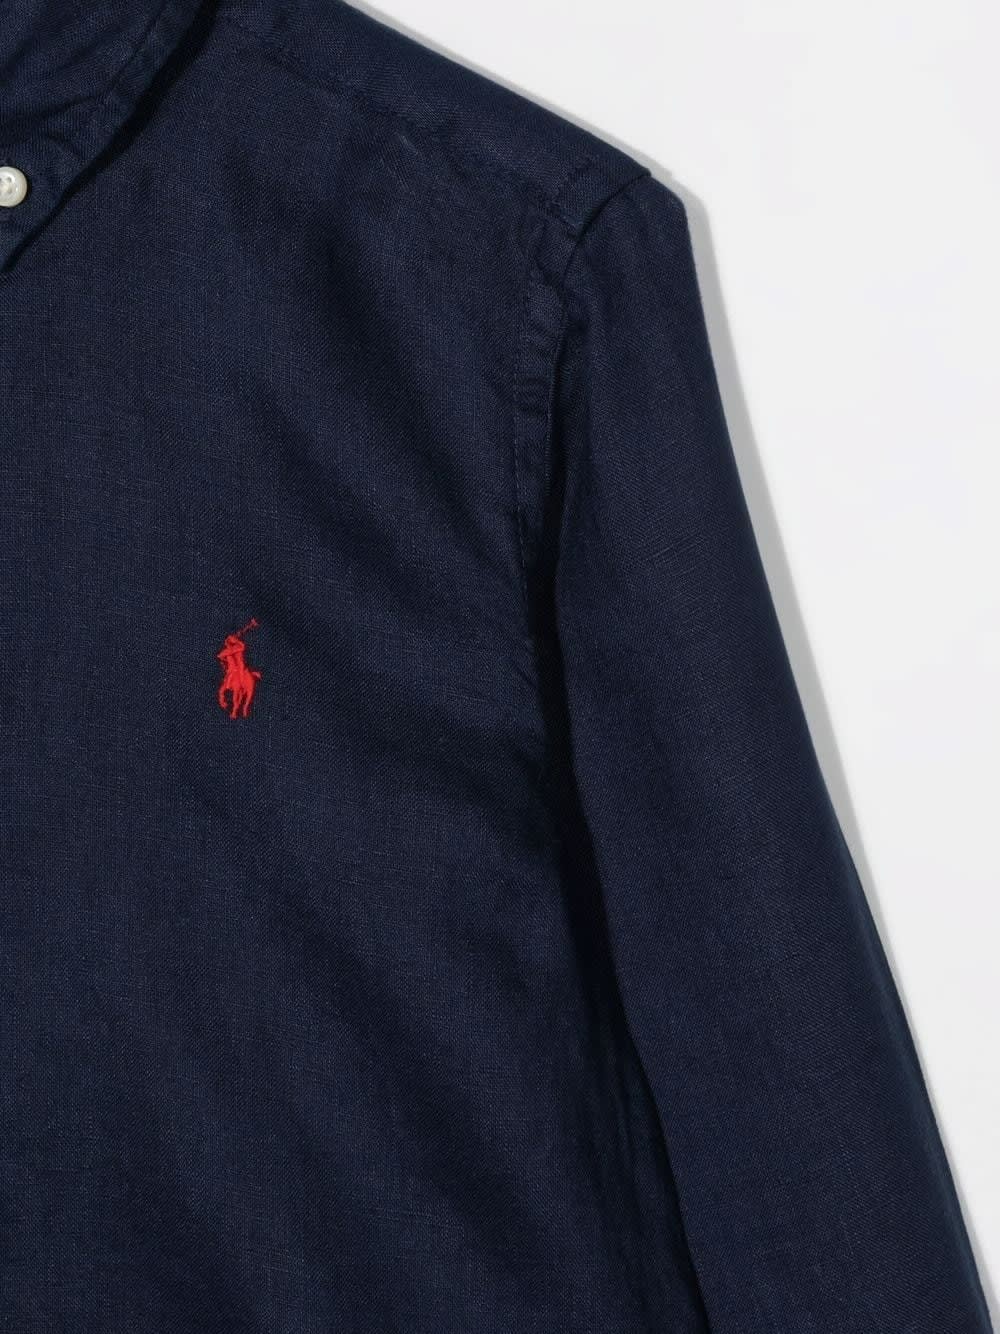 Shop Polo Ralph Lauren Navy Blue Linen Shirt With Embroidered Pony